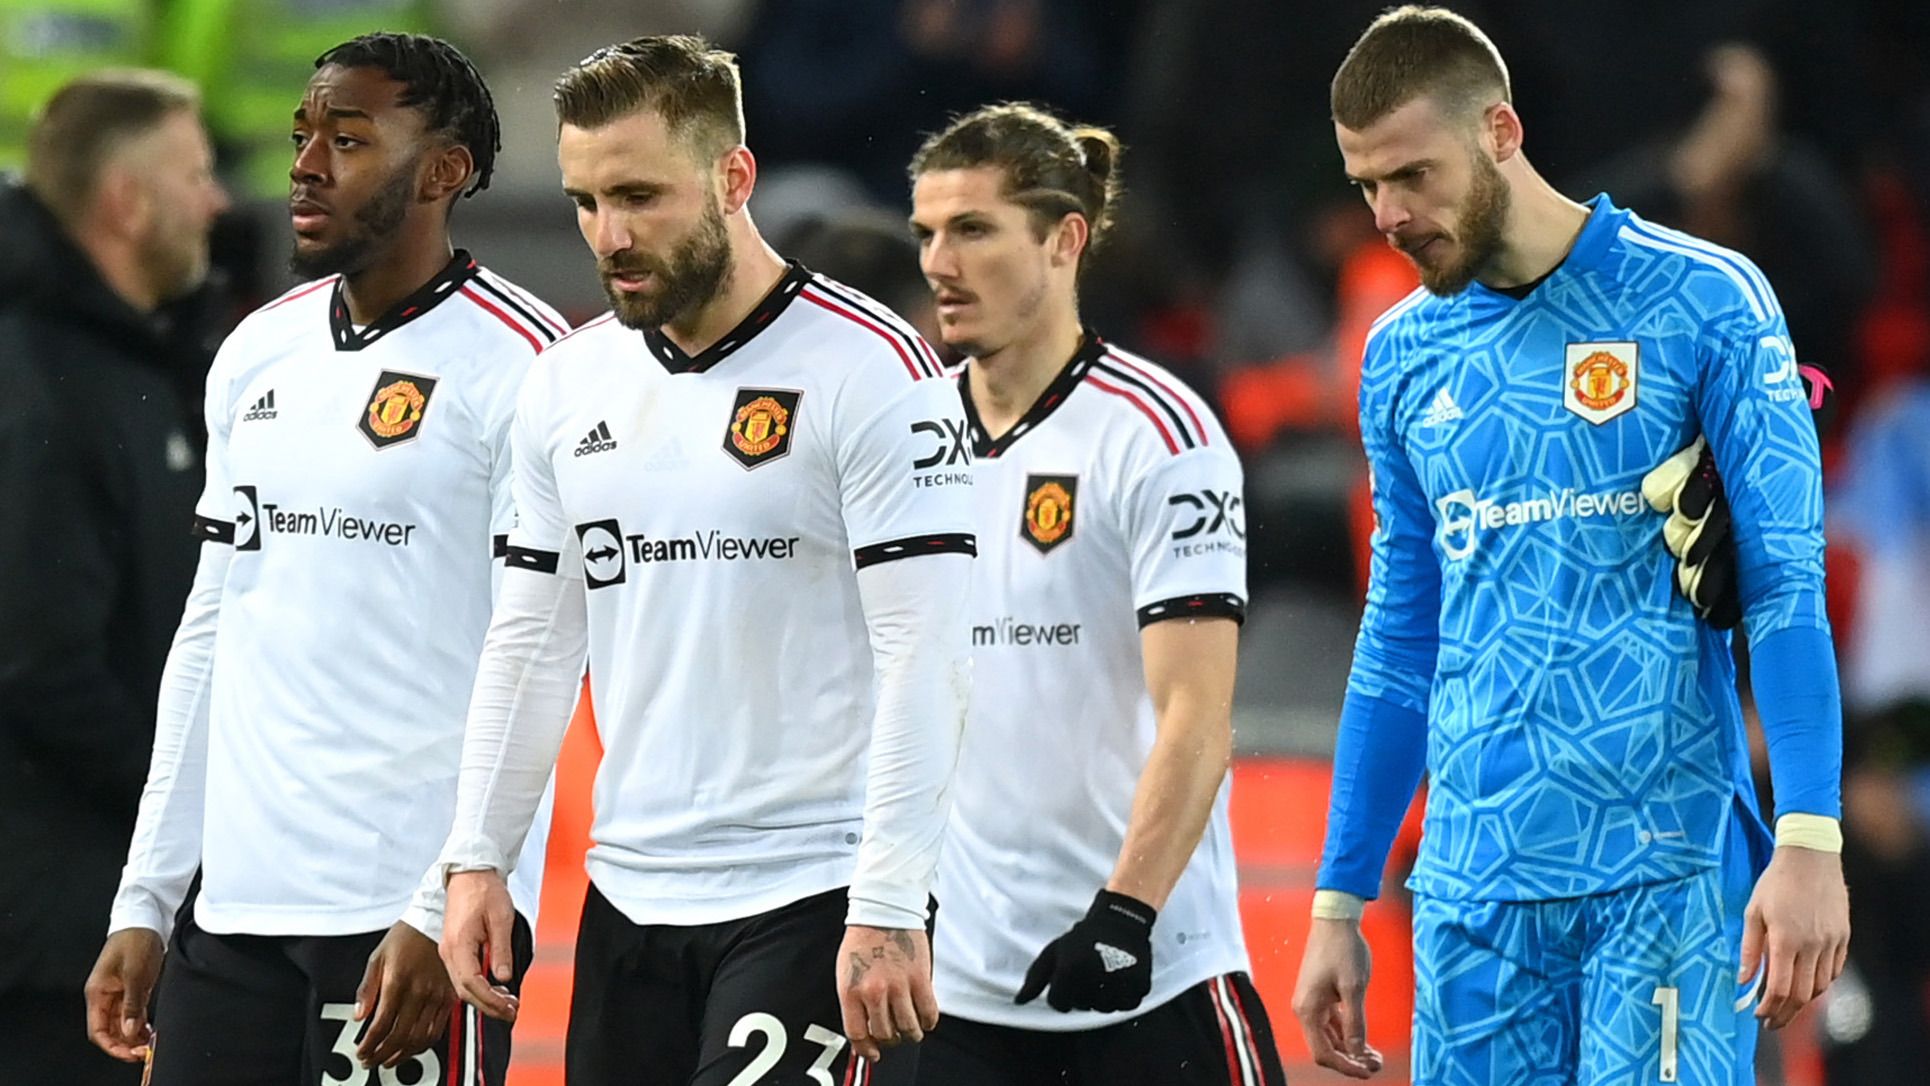 Players of Manchester United look dejected as they leave the field, after being defeated 7-0 during the Premier League match between Liverpool FC and Manchester United at Anfield on March 05, 2023 in Liverpool, England. (Photo by Michael Regan/Getty Images)